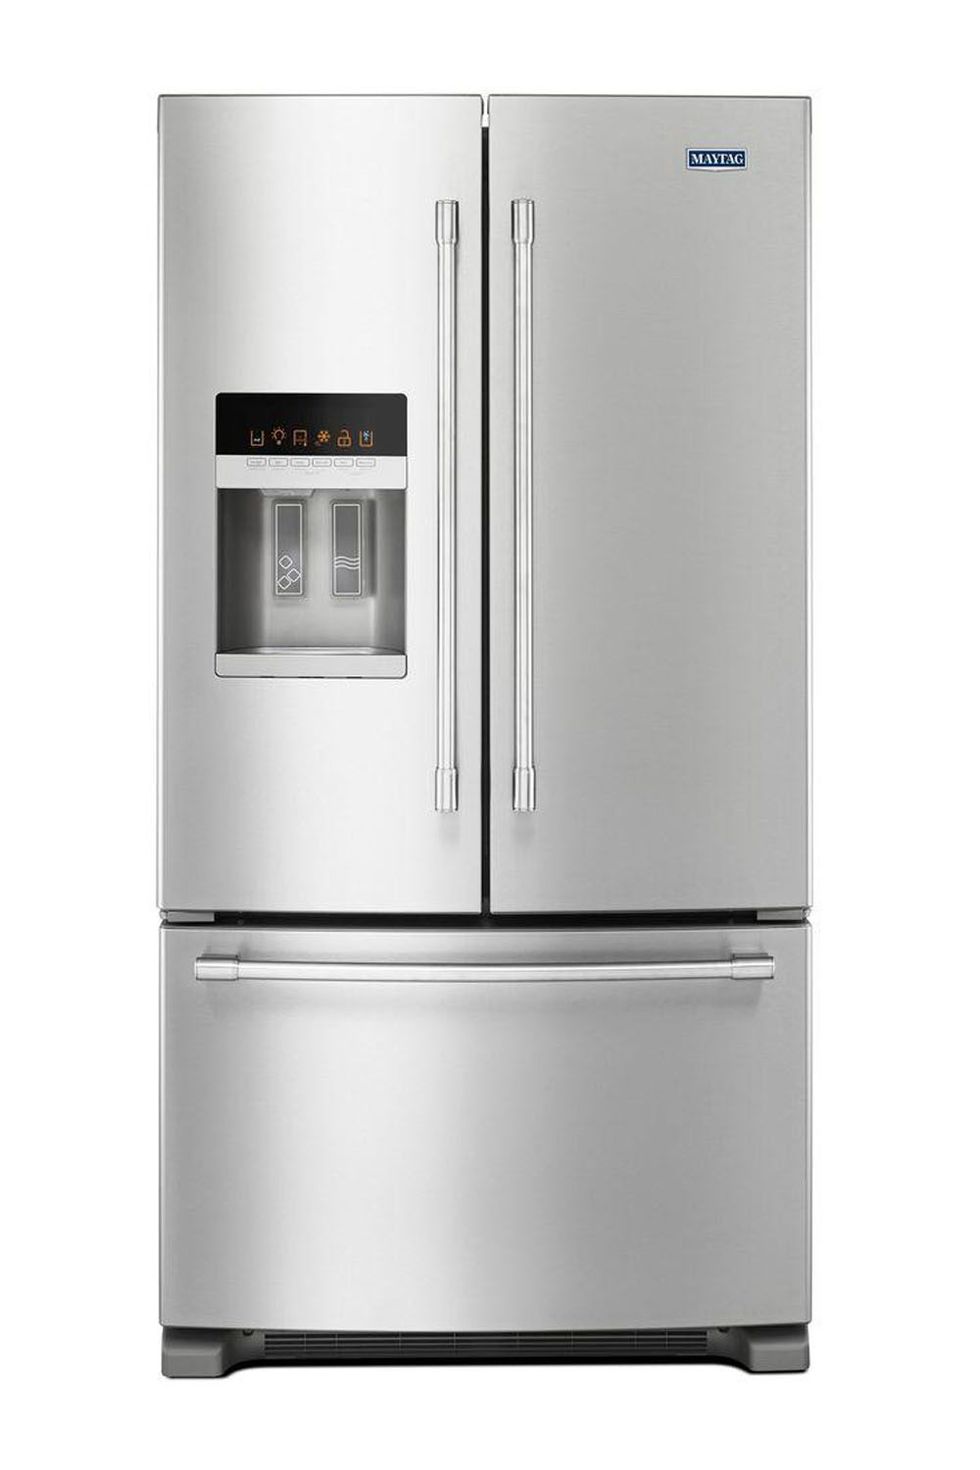 What Types of Refrigerators Are Best for Your Kitchen?